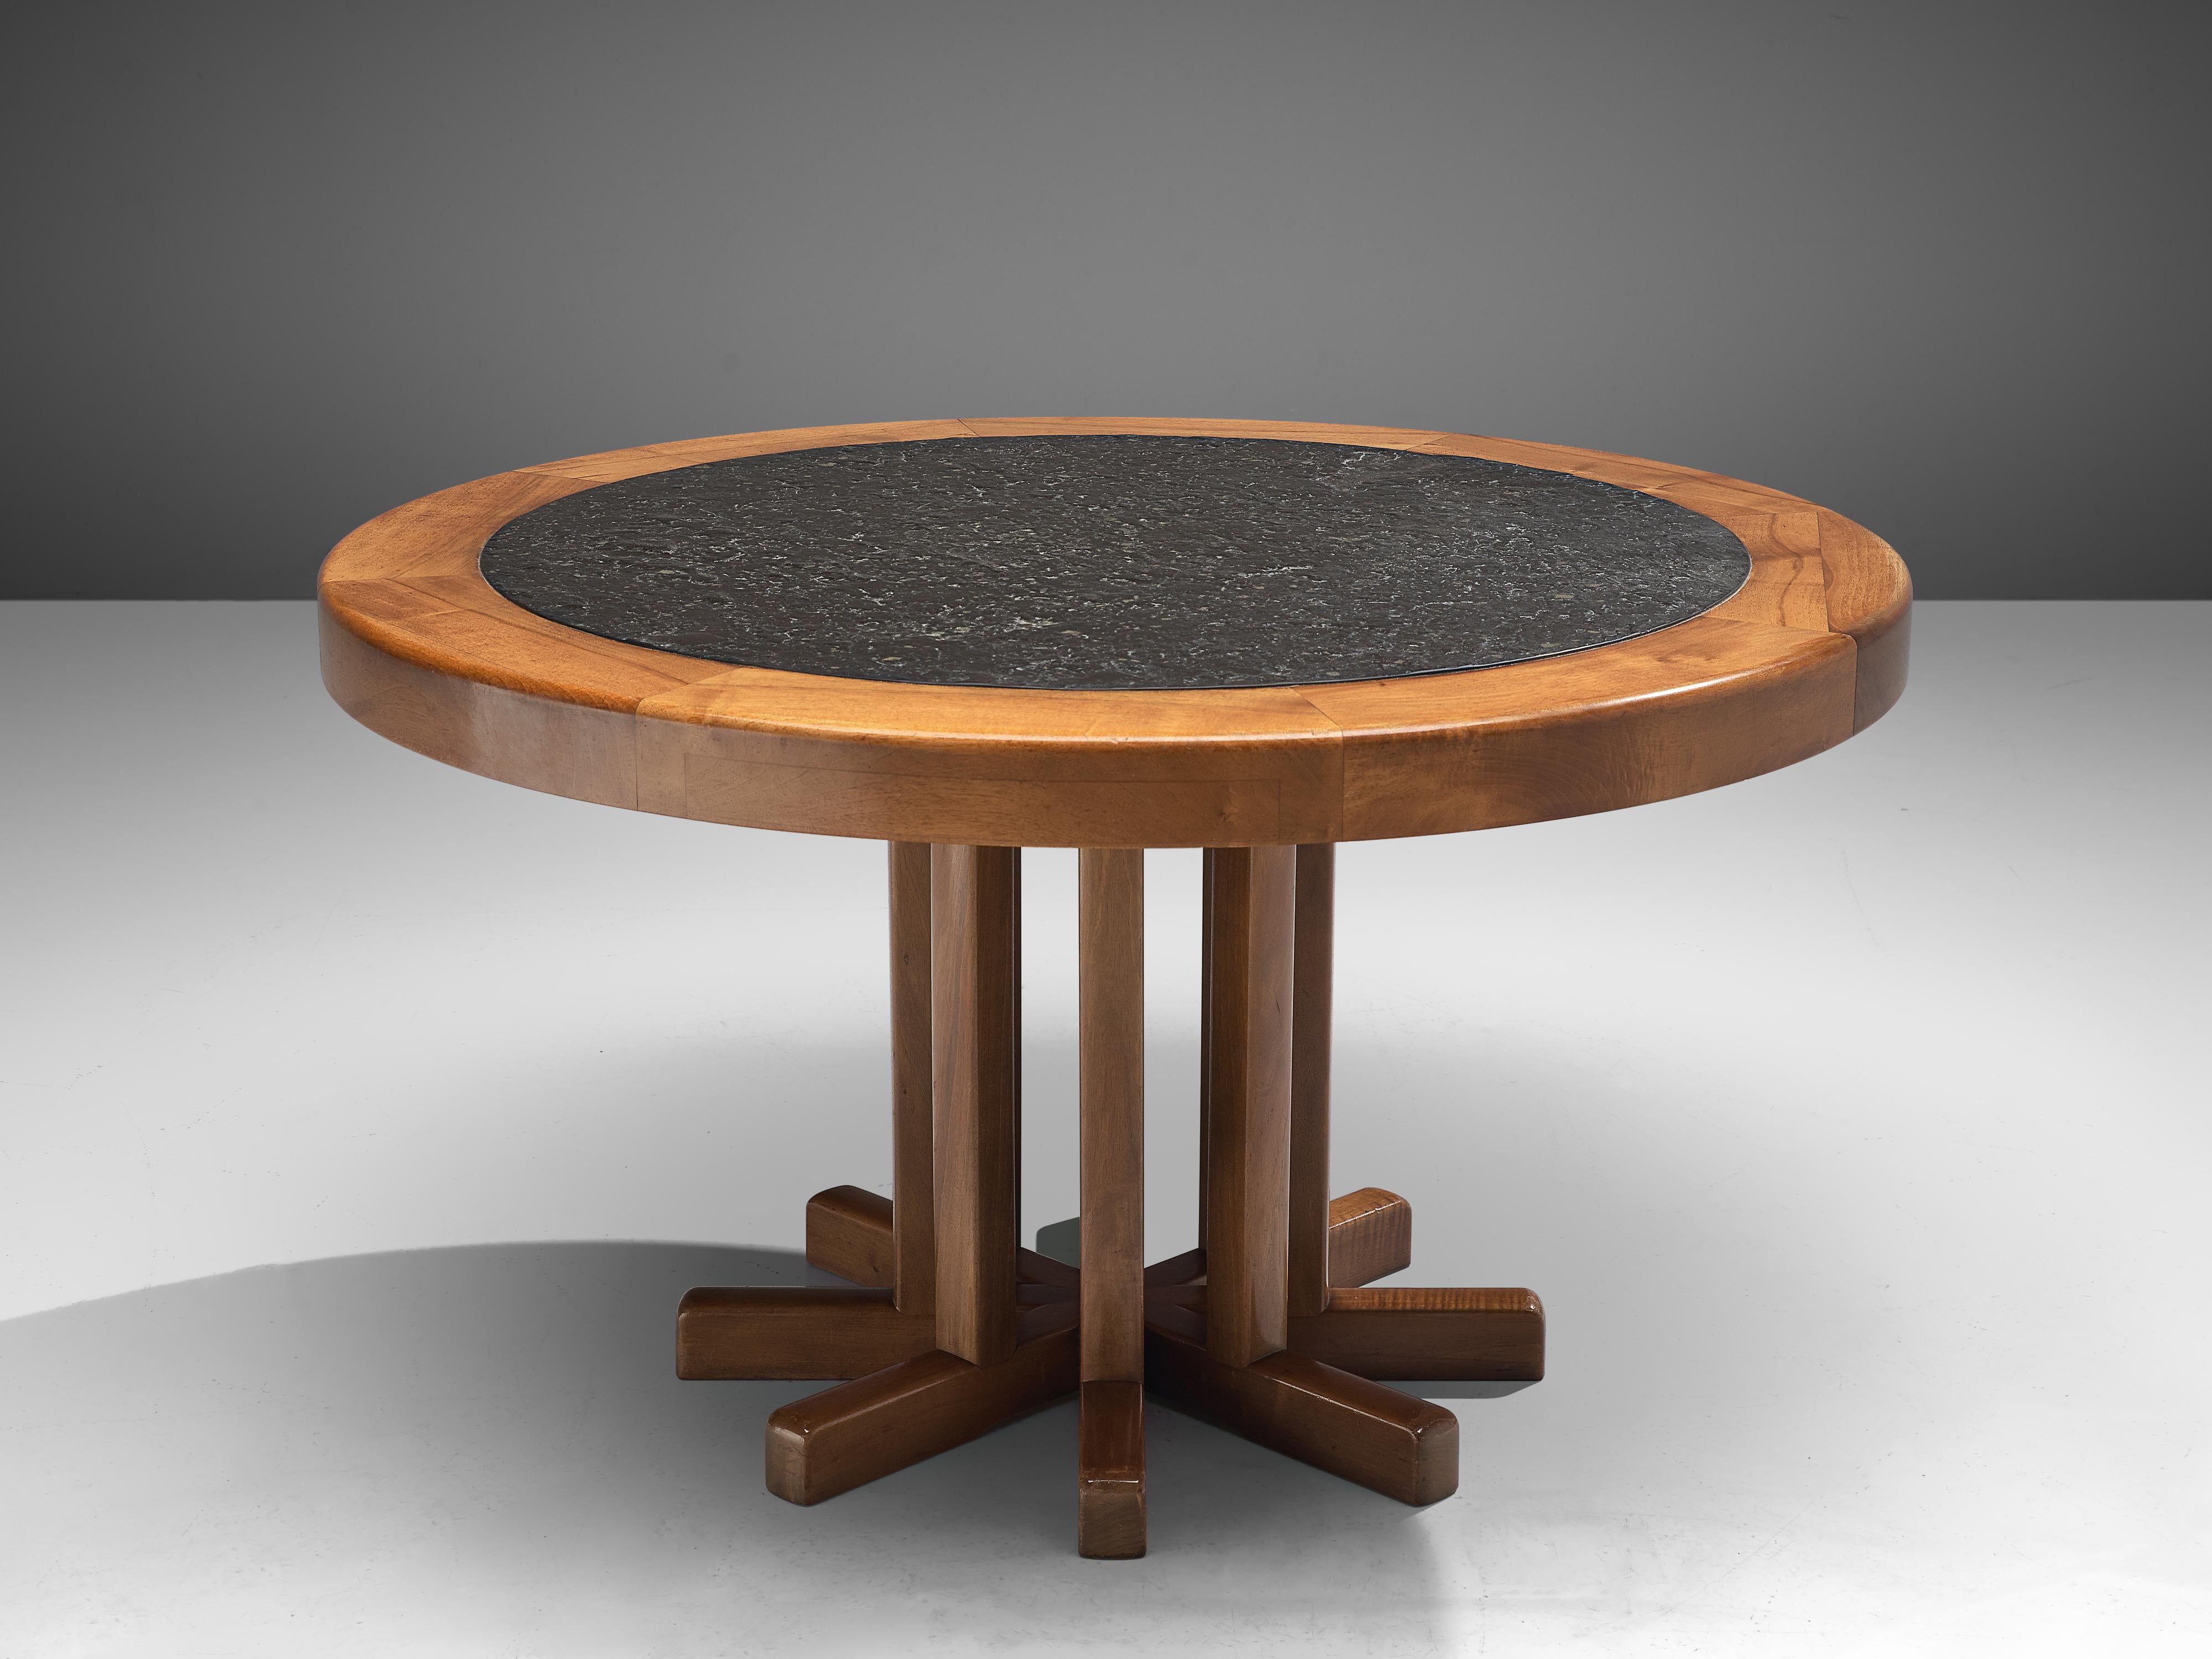 Round dining table, elm, slate, France, 1970s

This French dining table shows a wonderful combination of materials and well-balanced forms. Both the tabletop and the base catch the eye. The pedestal base consists of eight wooden slats arranged in a